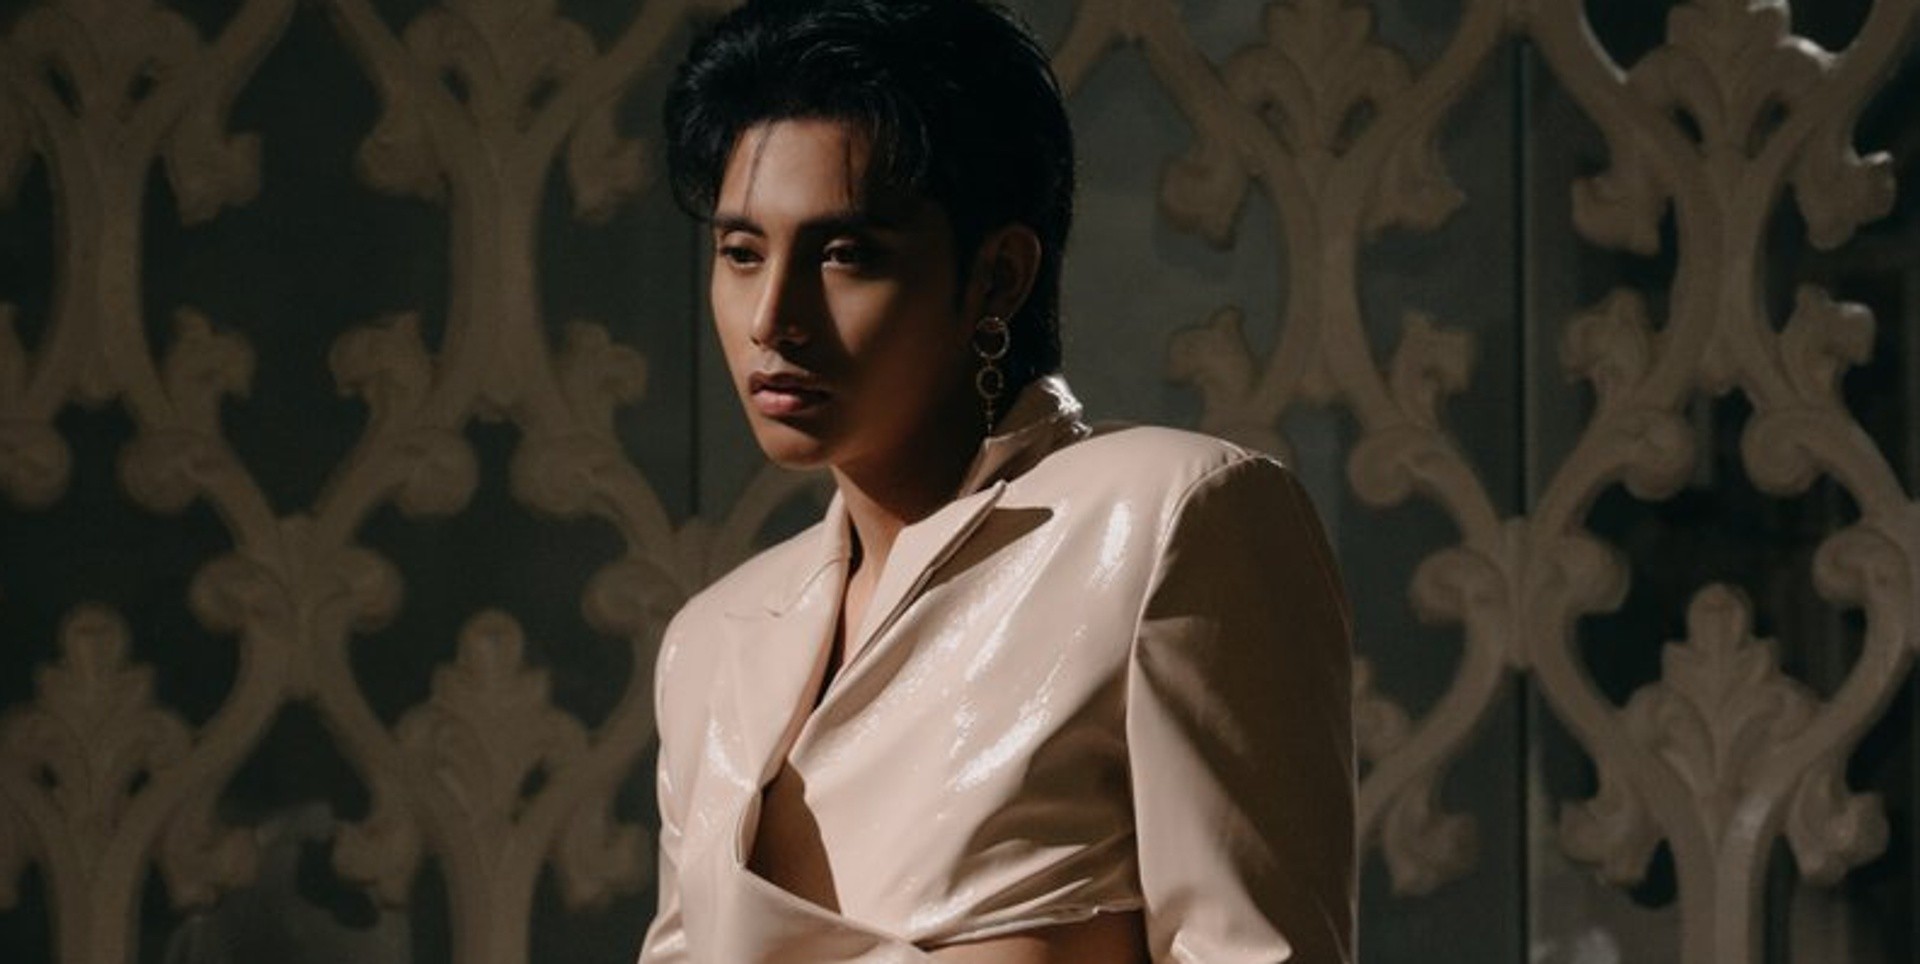 SB19's Ken to make solo debut as FELIP with 'Palayo'